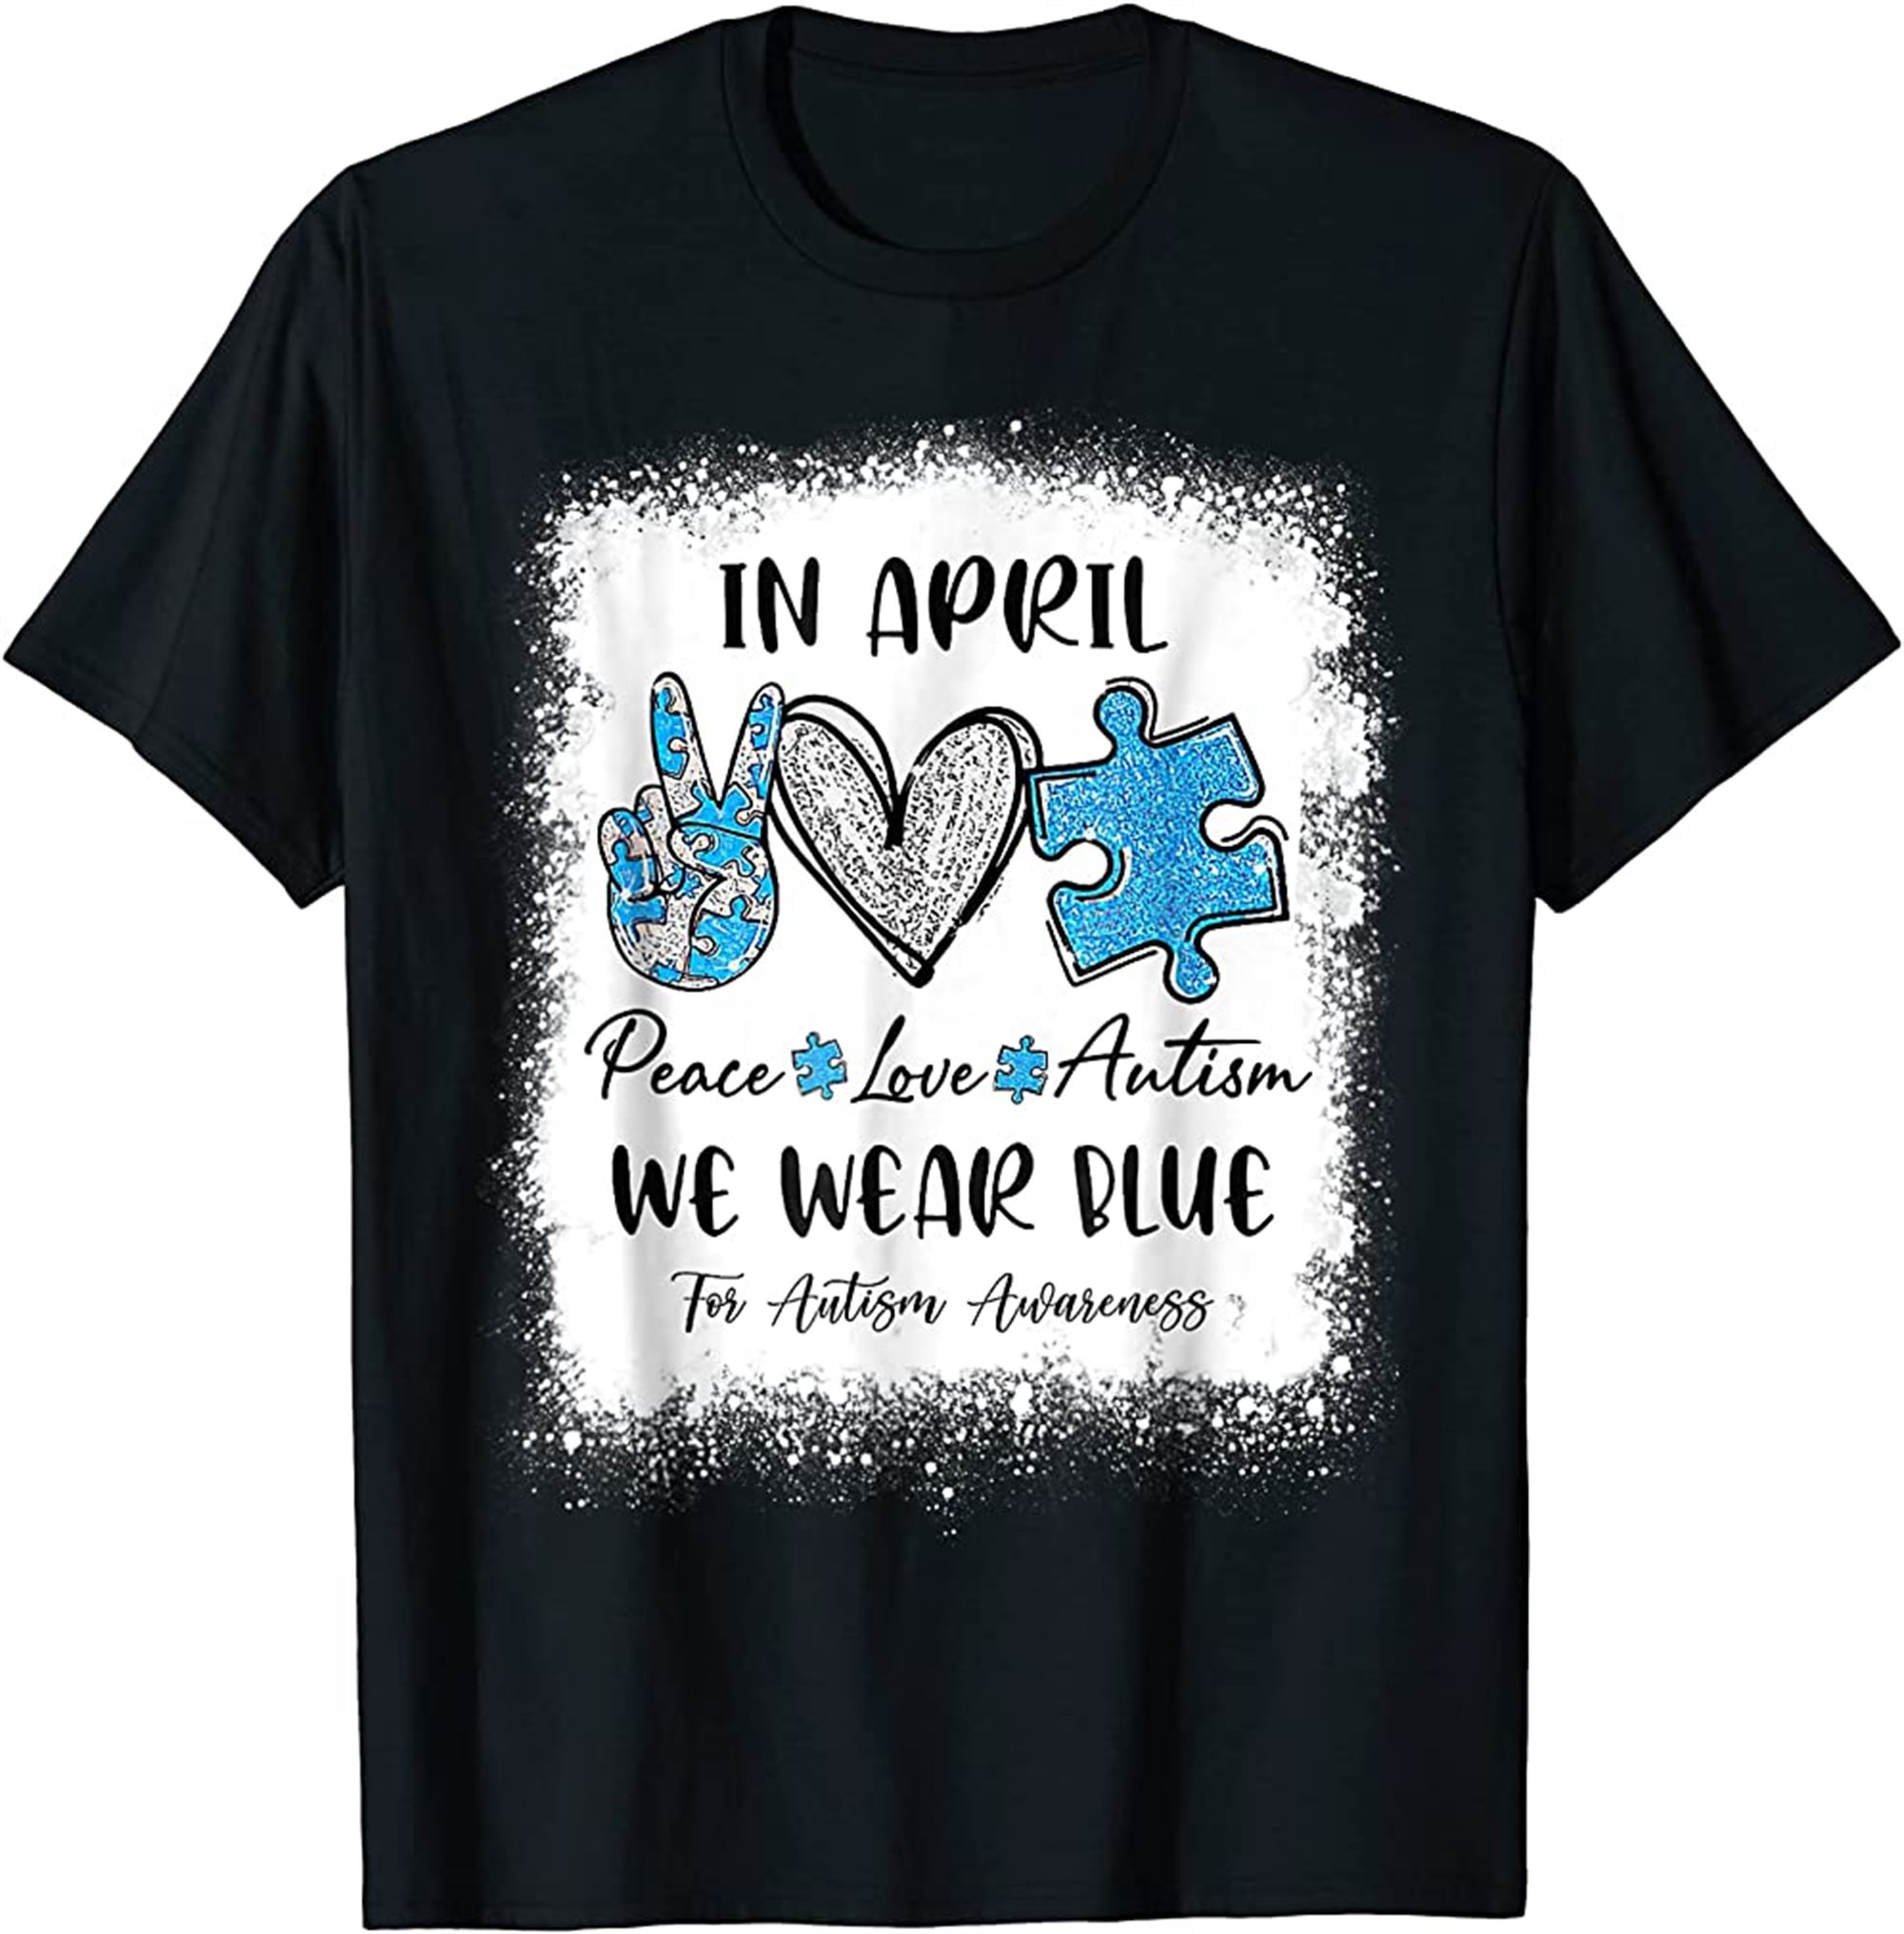 Peace Love Autism In April We Wear Blue For Autism Awareness T-shirt Plus Size Up To 5xl